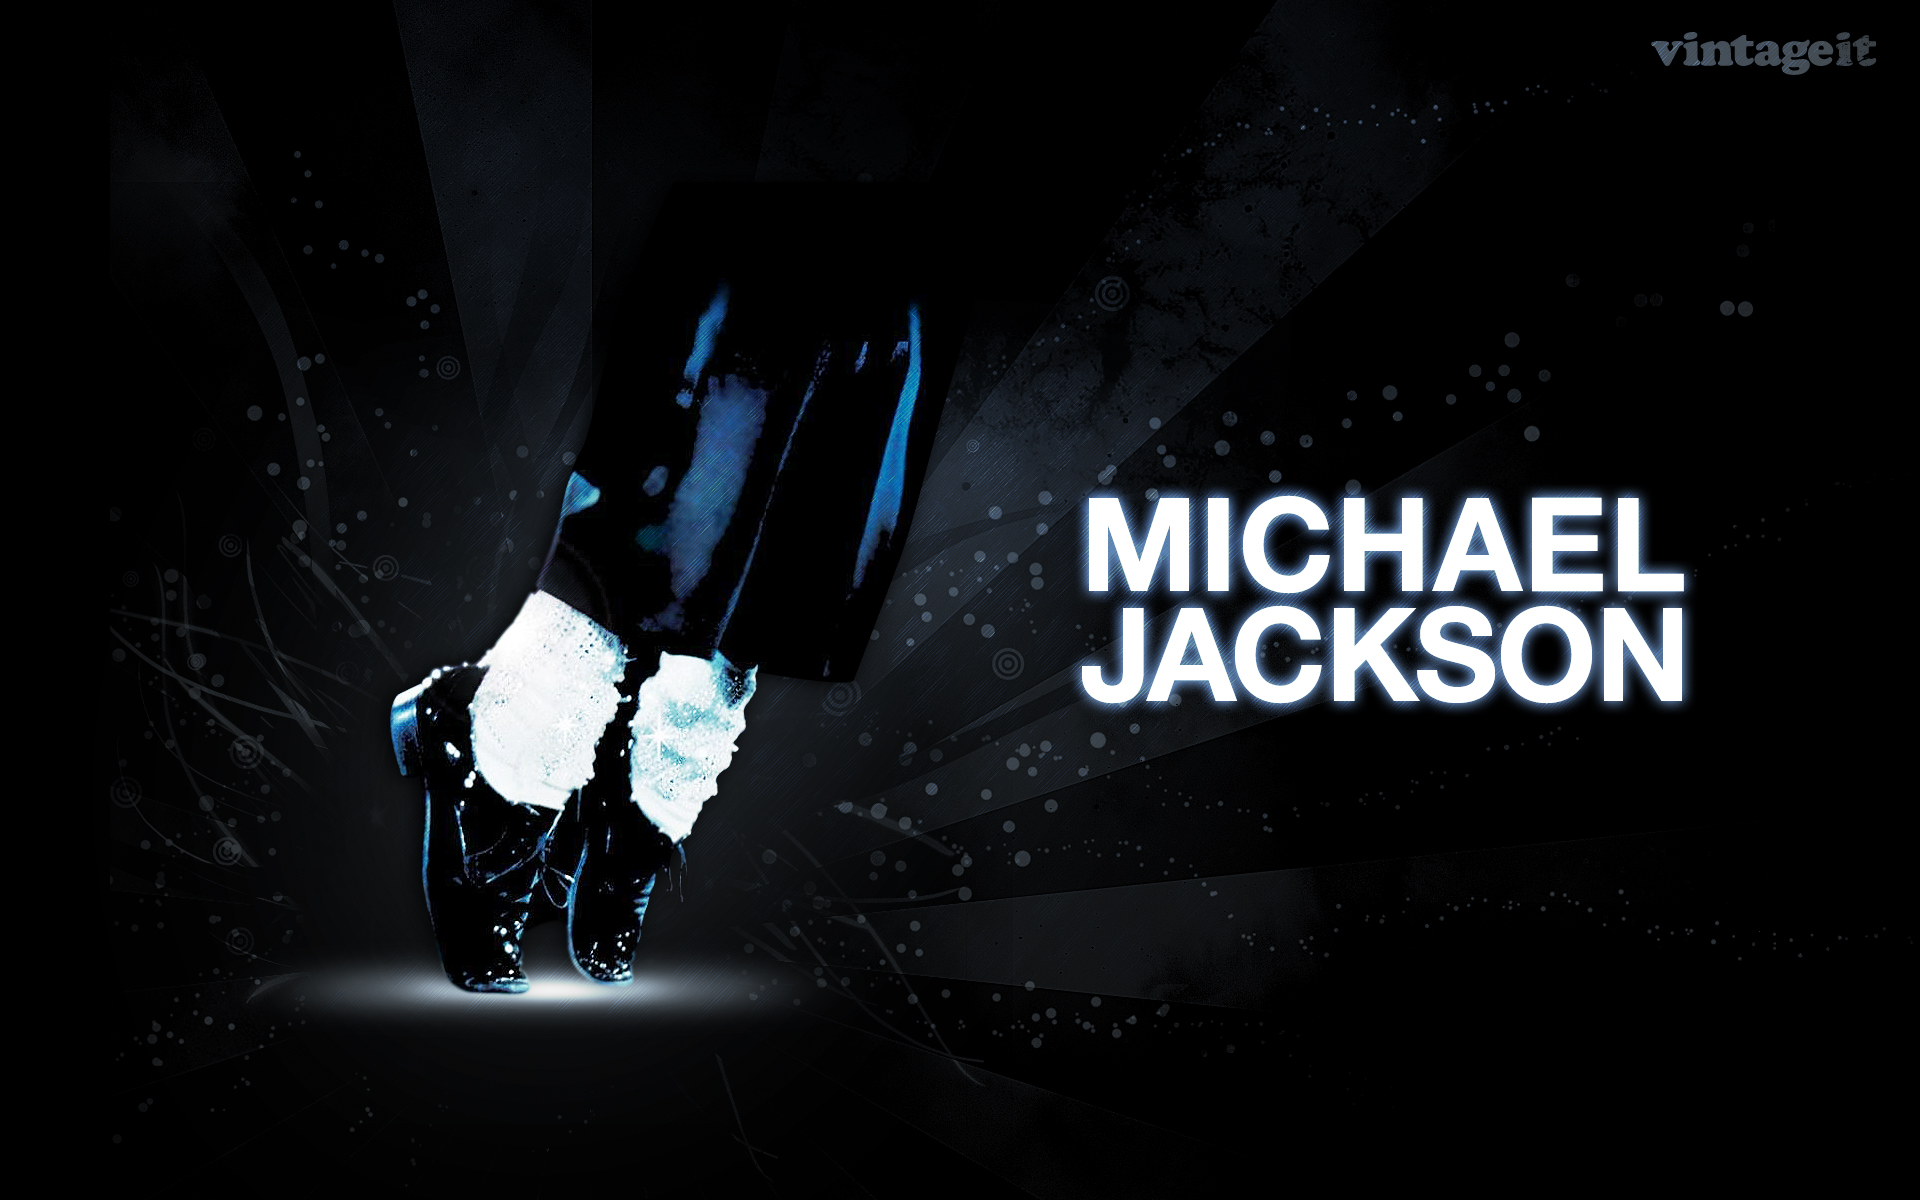 Michael Jackson Vintage Wallpaper wallpapers and images